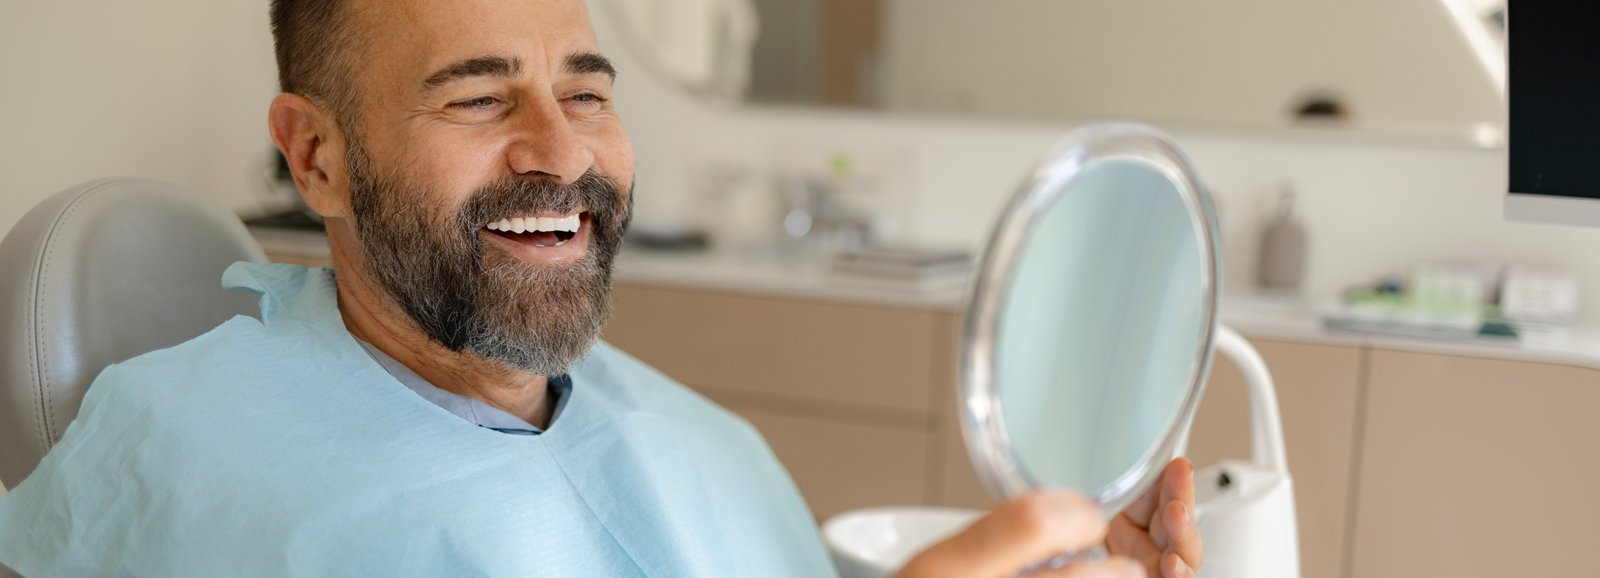 man-smiling-in-mirror-at-dentist-1600x578.png